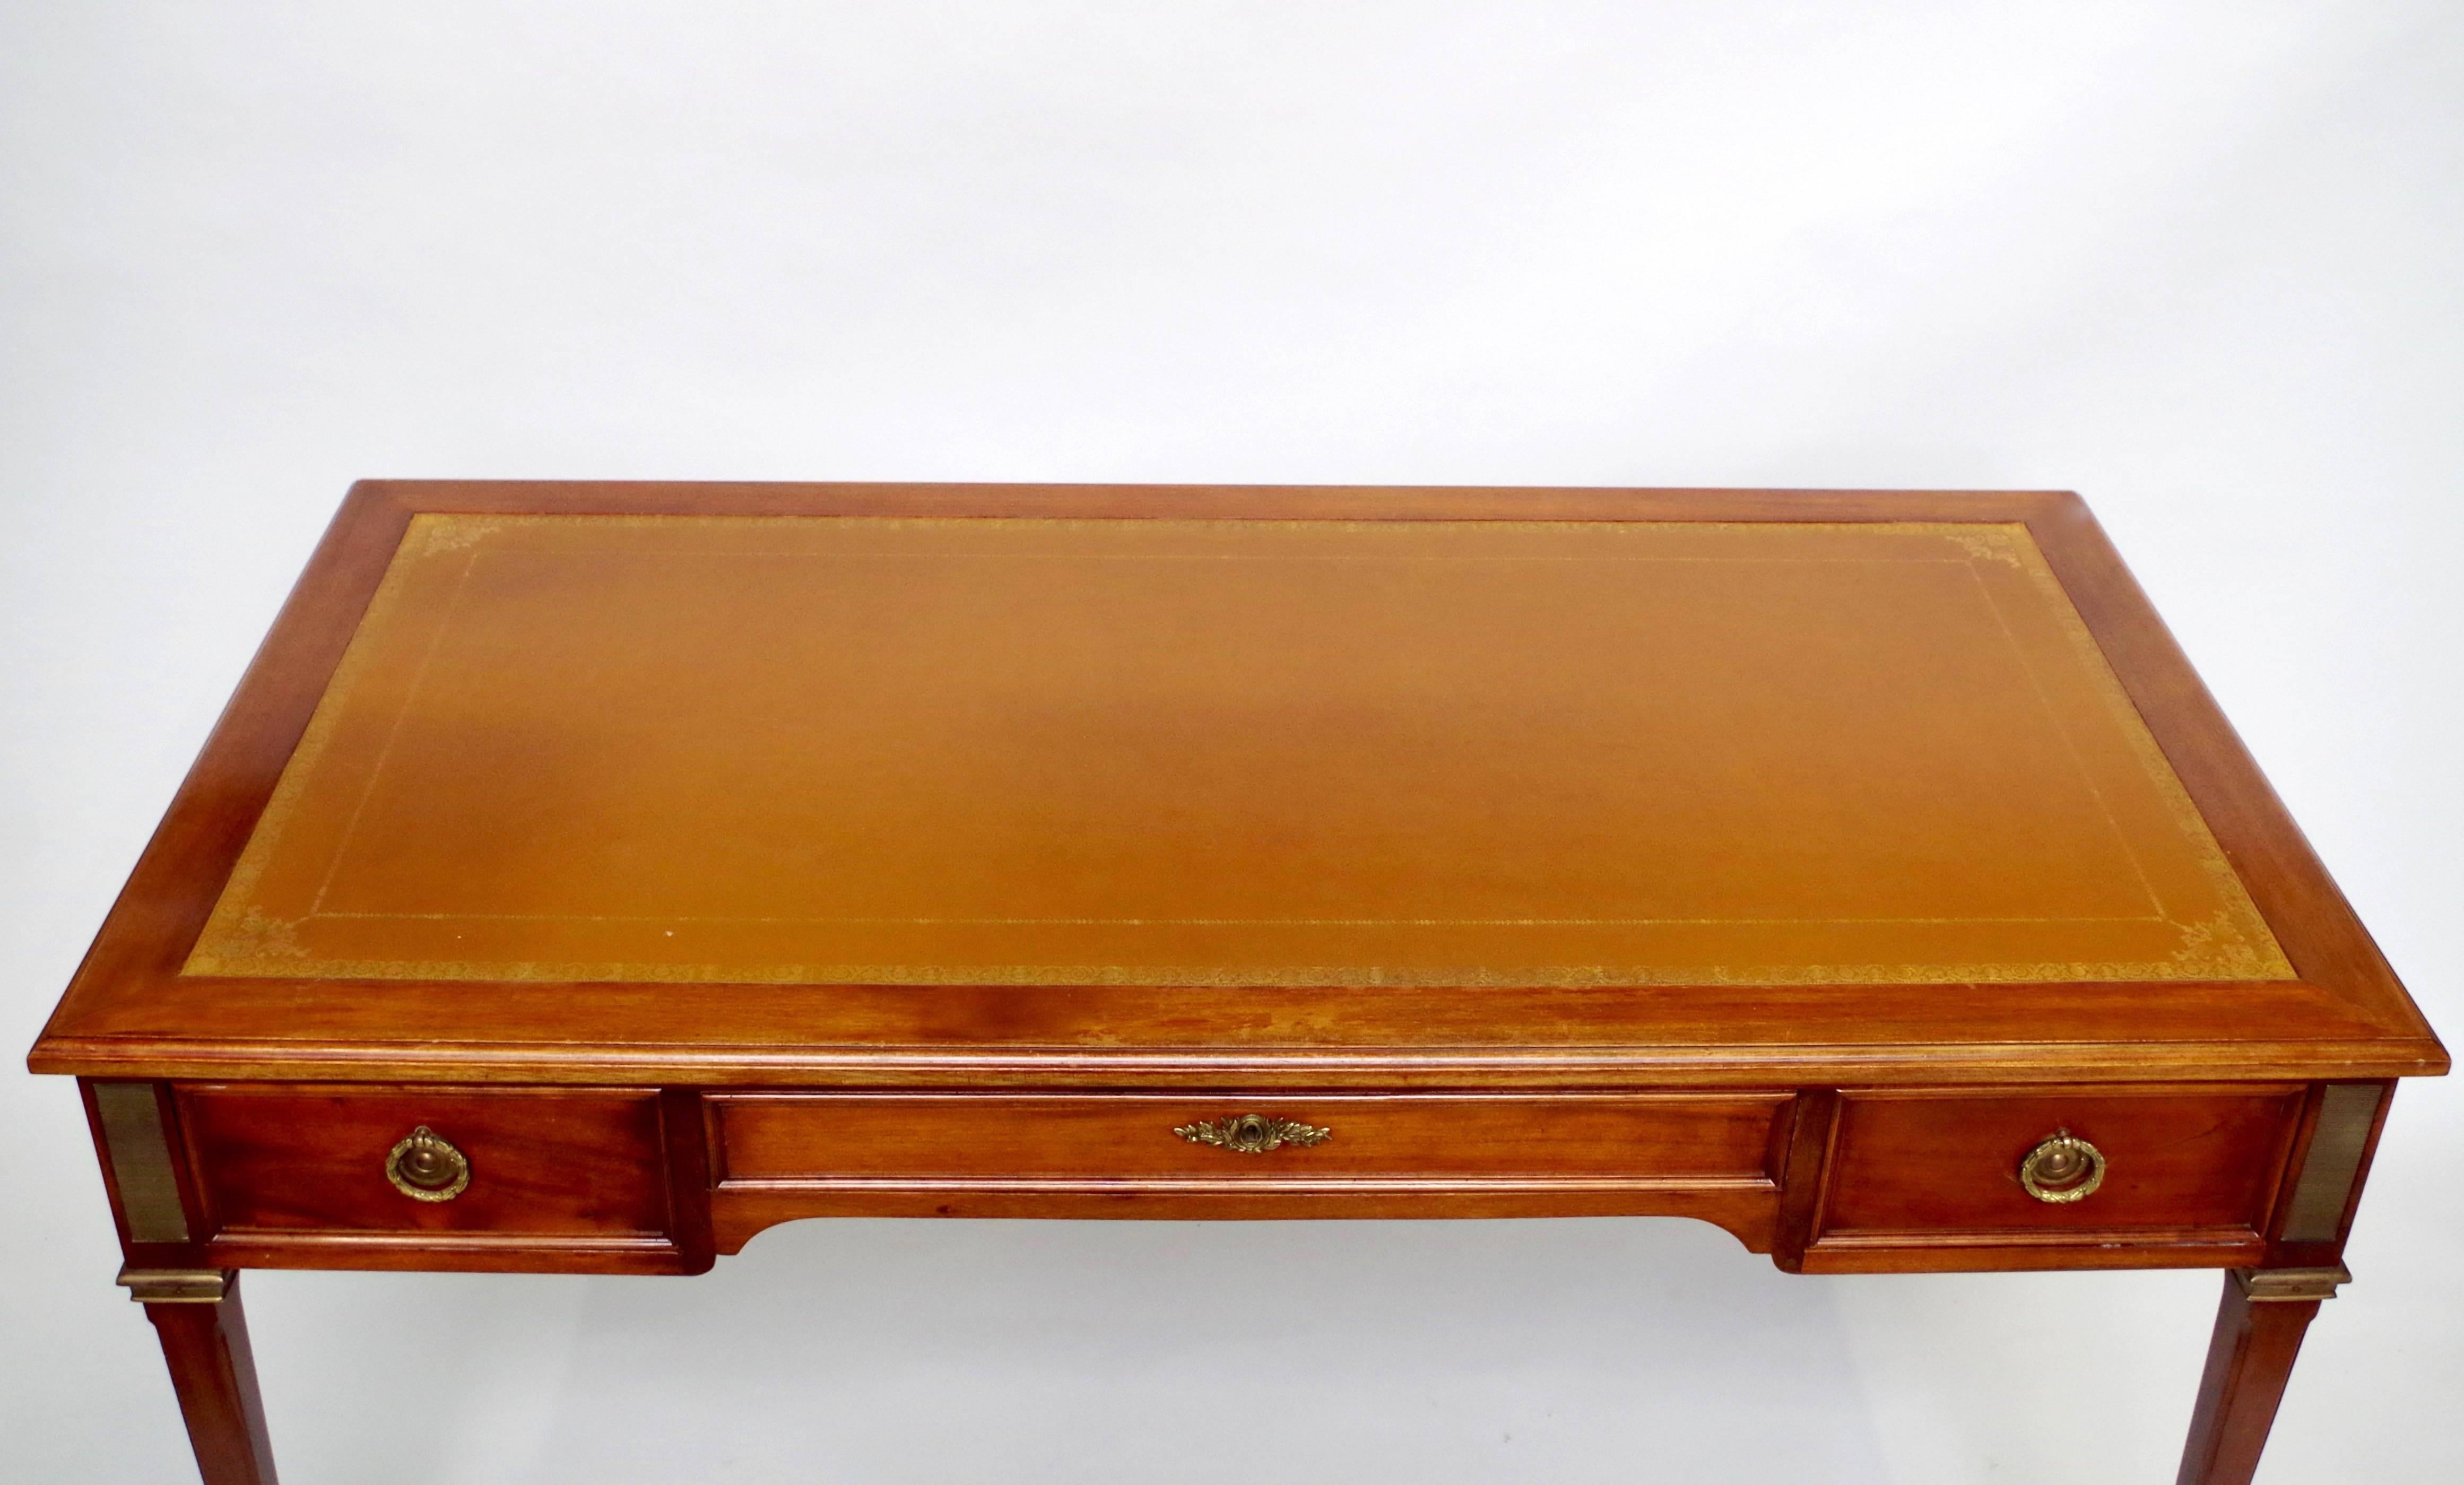 Louis XVI style flat desk, in mahogany with two writing slides.
Standing on four sheathed legs with square shoes and showing tree drawers on the apron. Tawny leather on the top hit with little golden irons and also on the two retractable writing